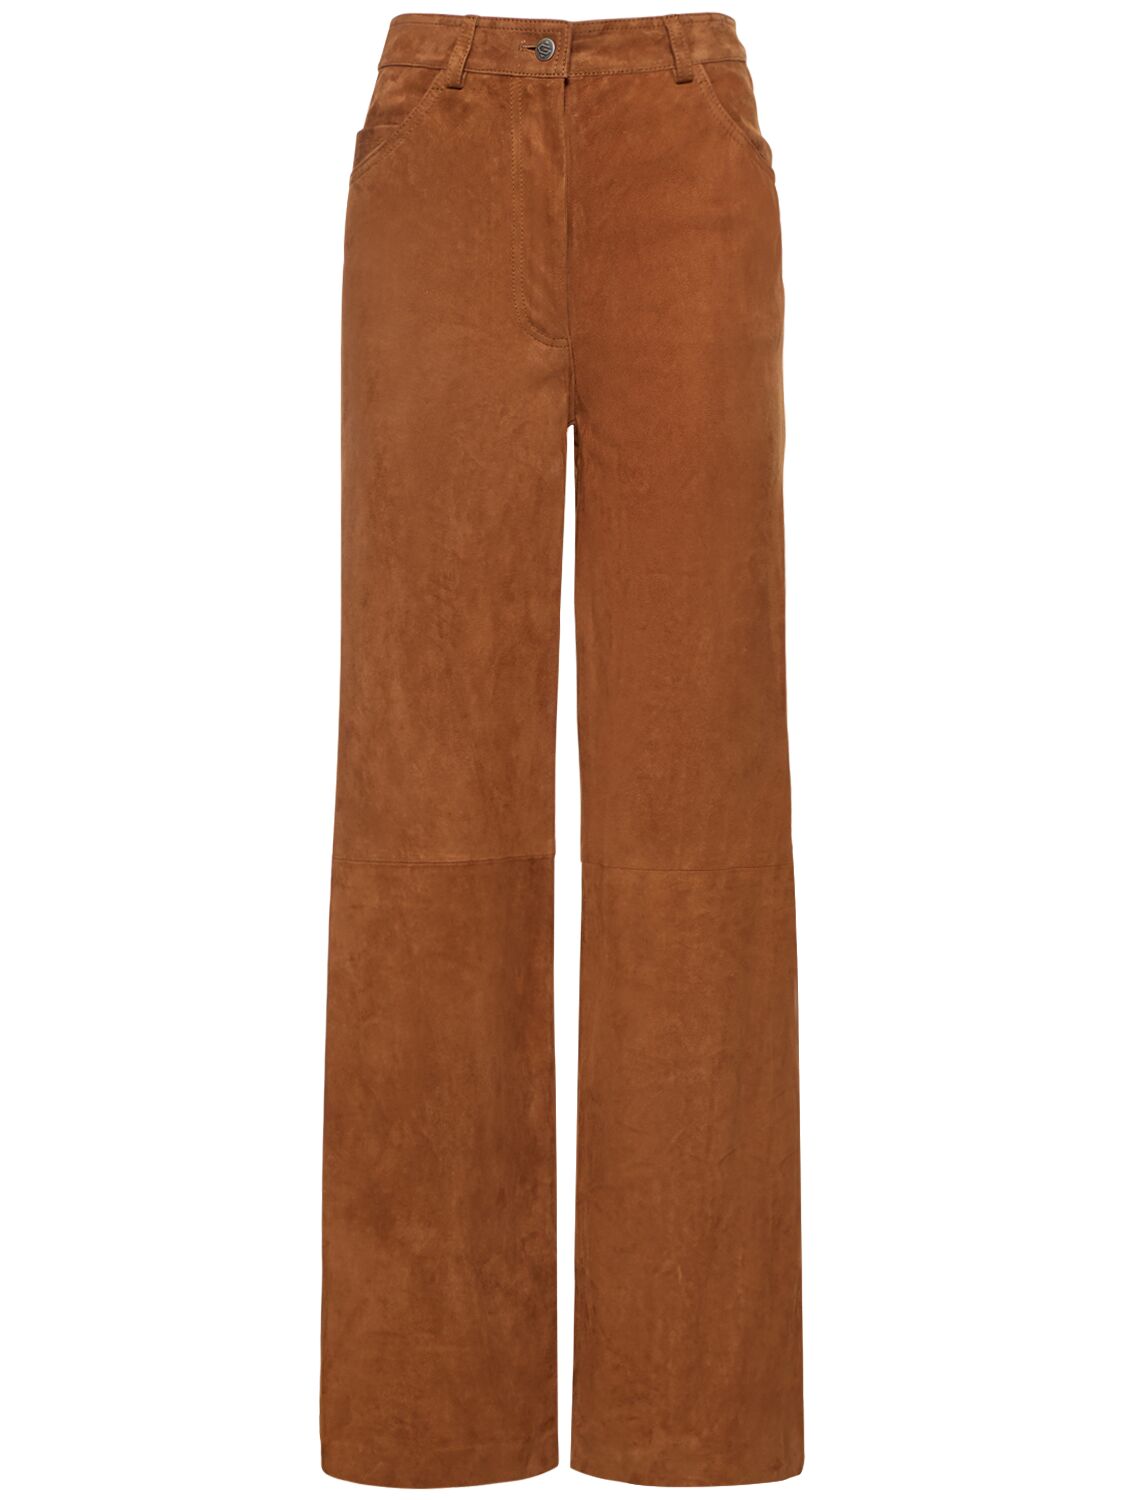 Image of Suede Leather Pants